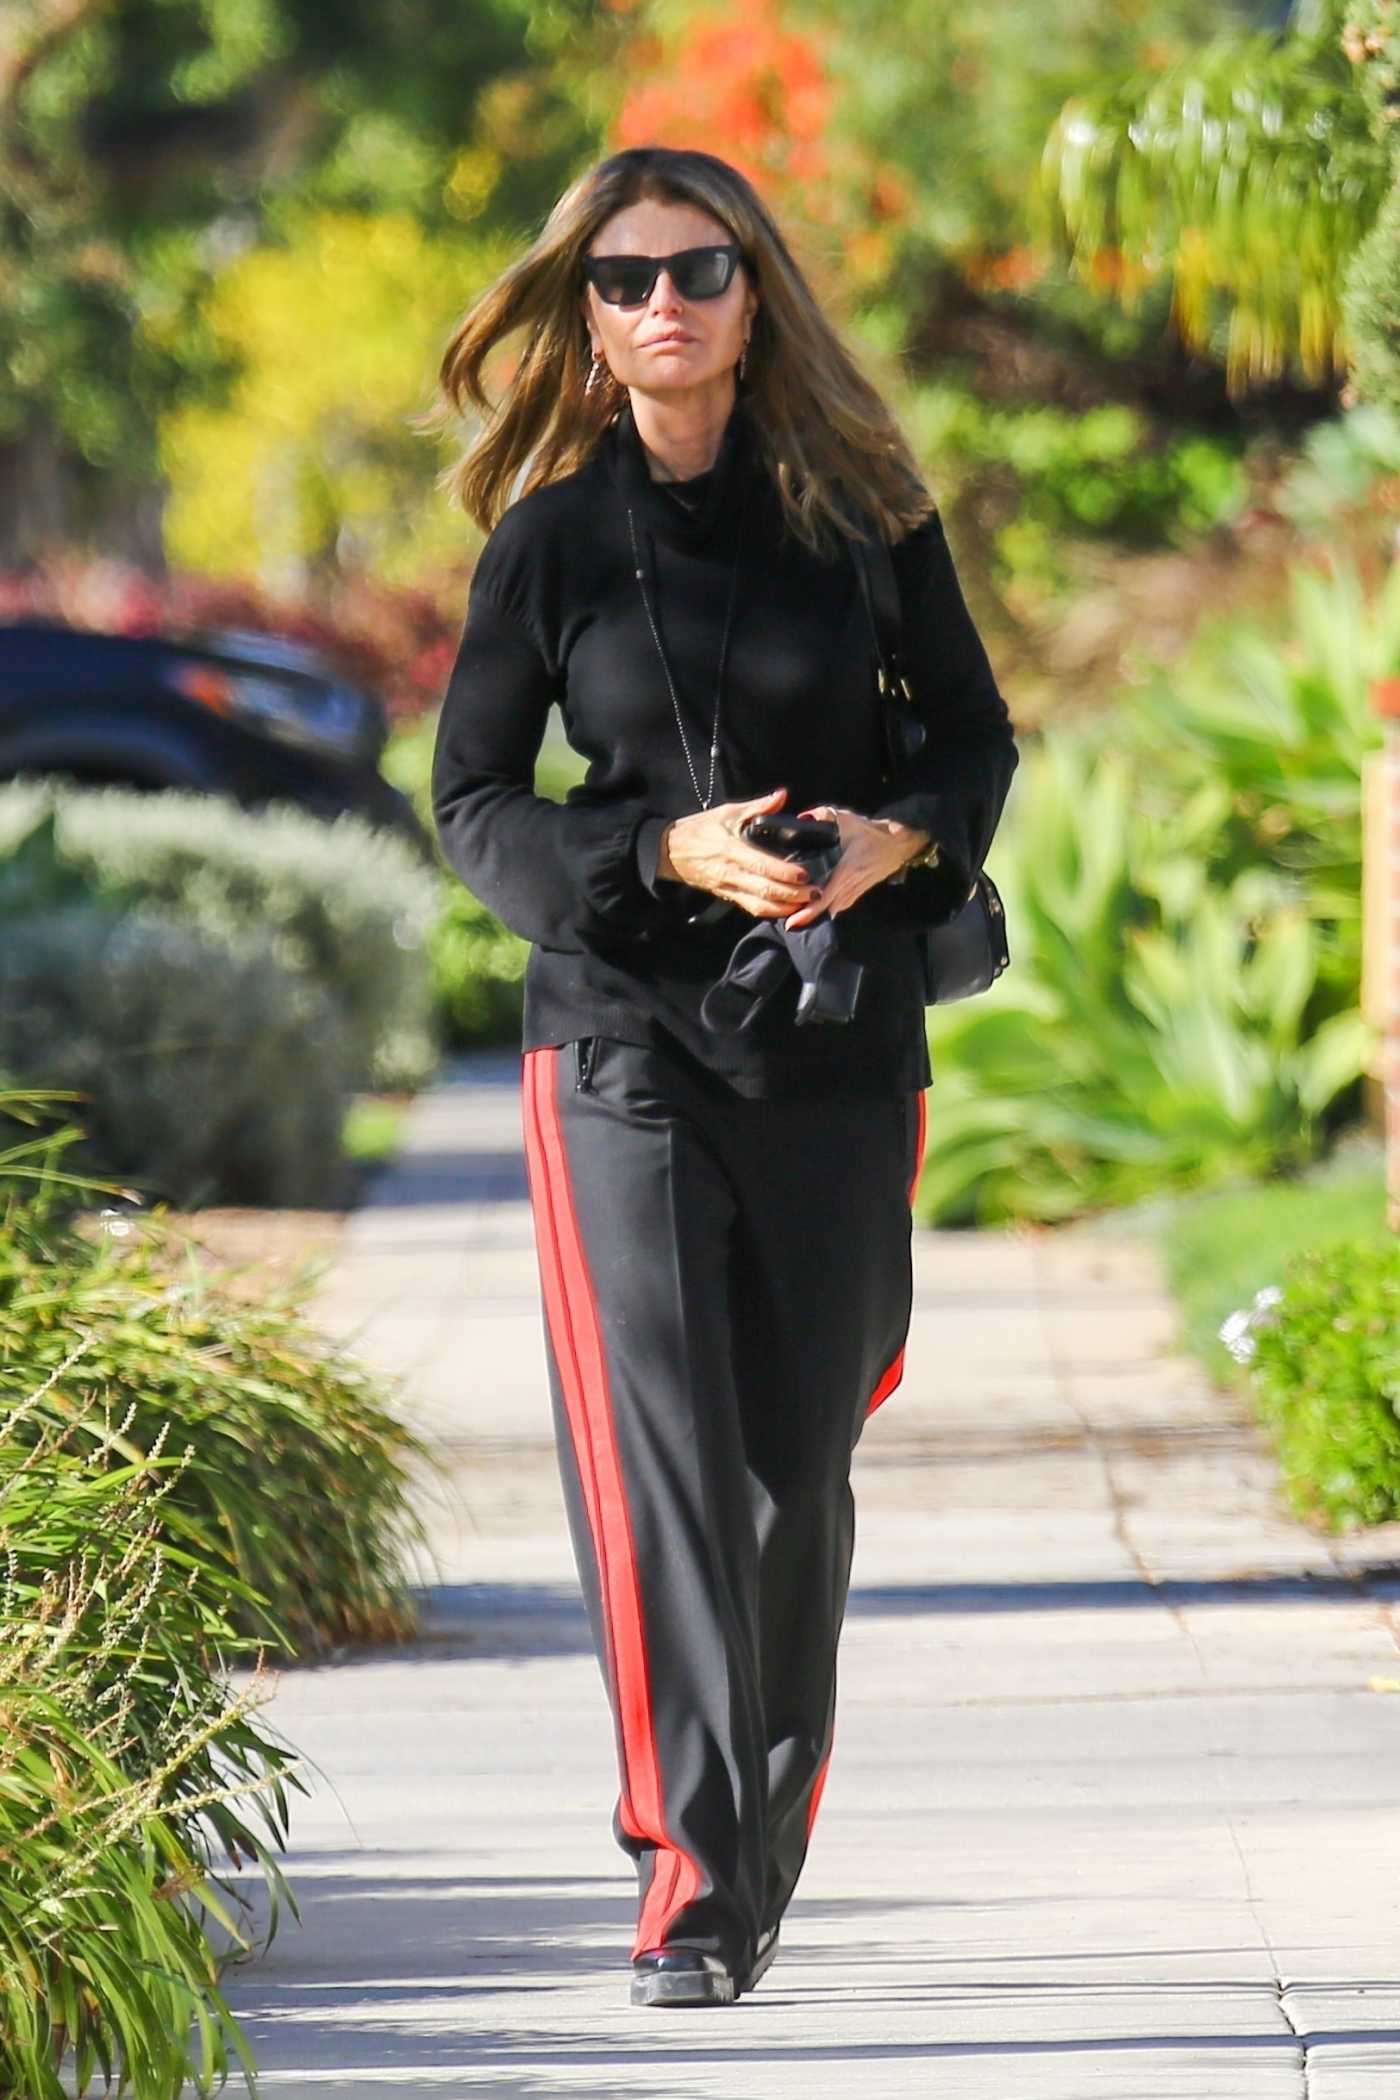 Maria Shriver in a Black Track Pants Steps Out for a Retail Therapy Session in Santa Monica 01/05/2022